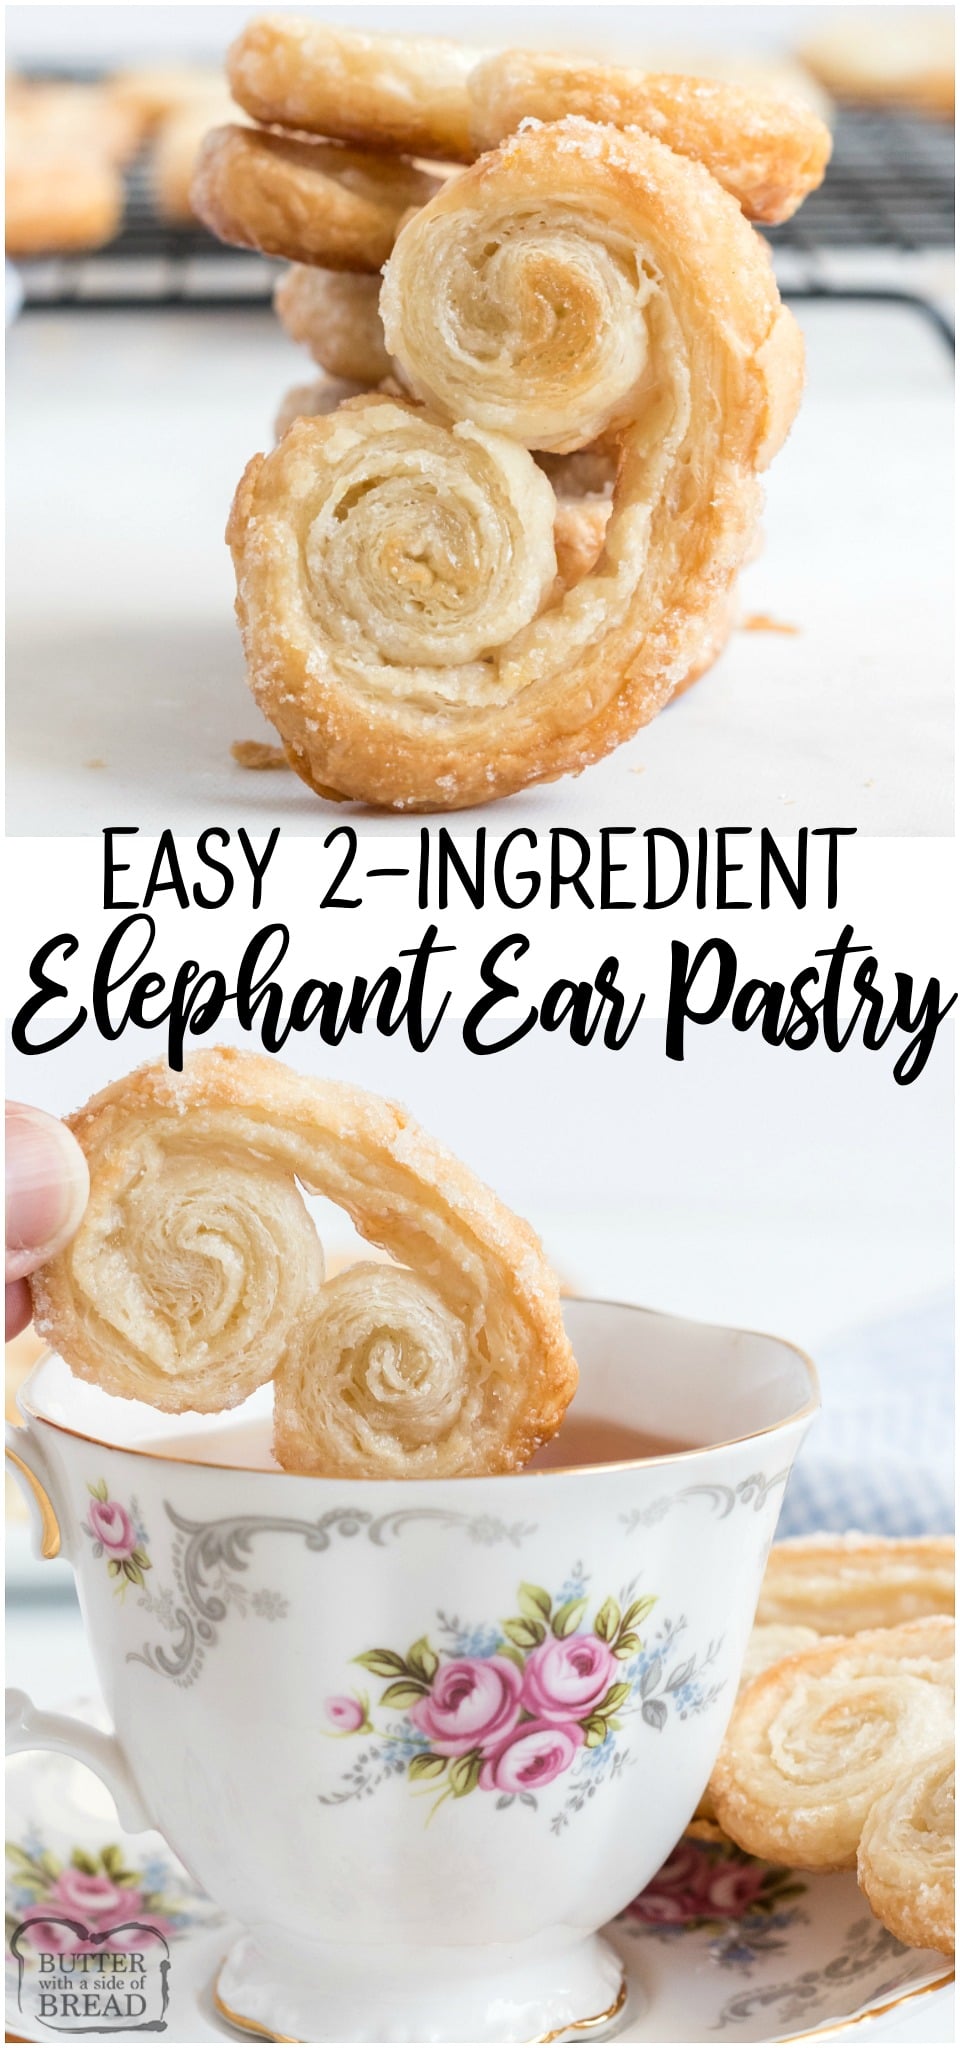 Elephant ears area delicious, buttery crisp sugar-covered french pastry that is also super simple to make! Just 2 INGREDIENTS and you can enjoy these Elephant Ear pastries at home!